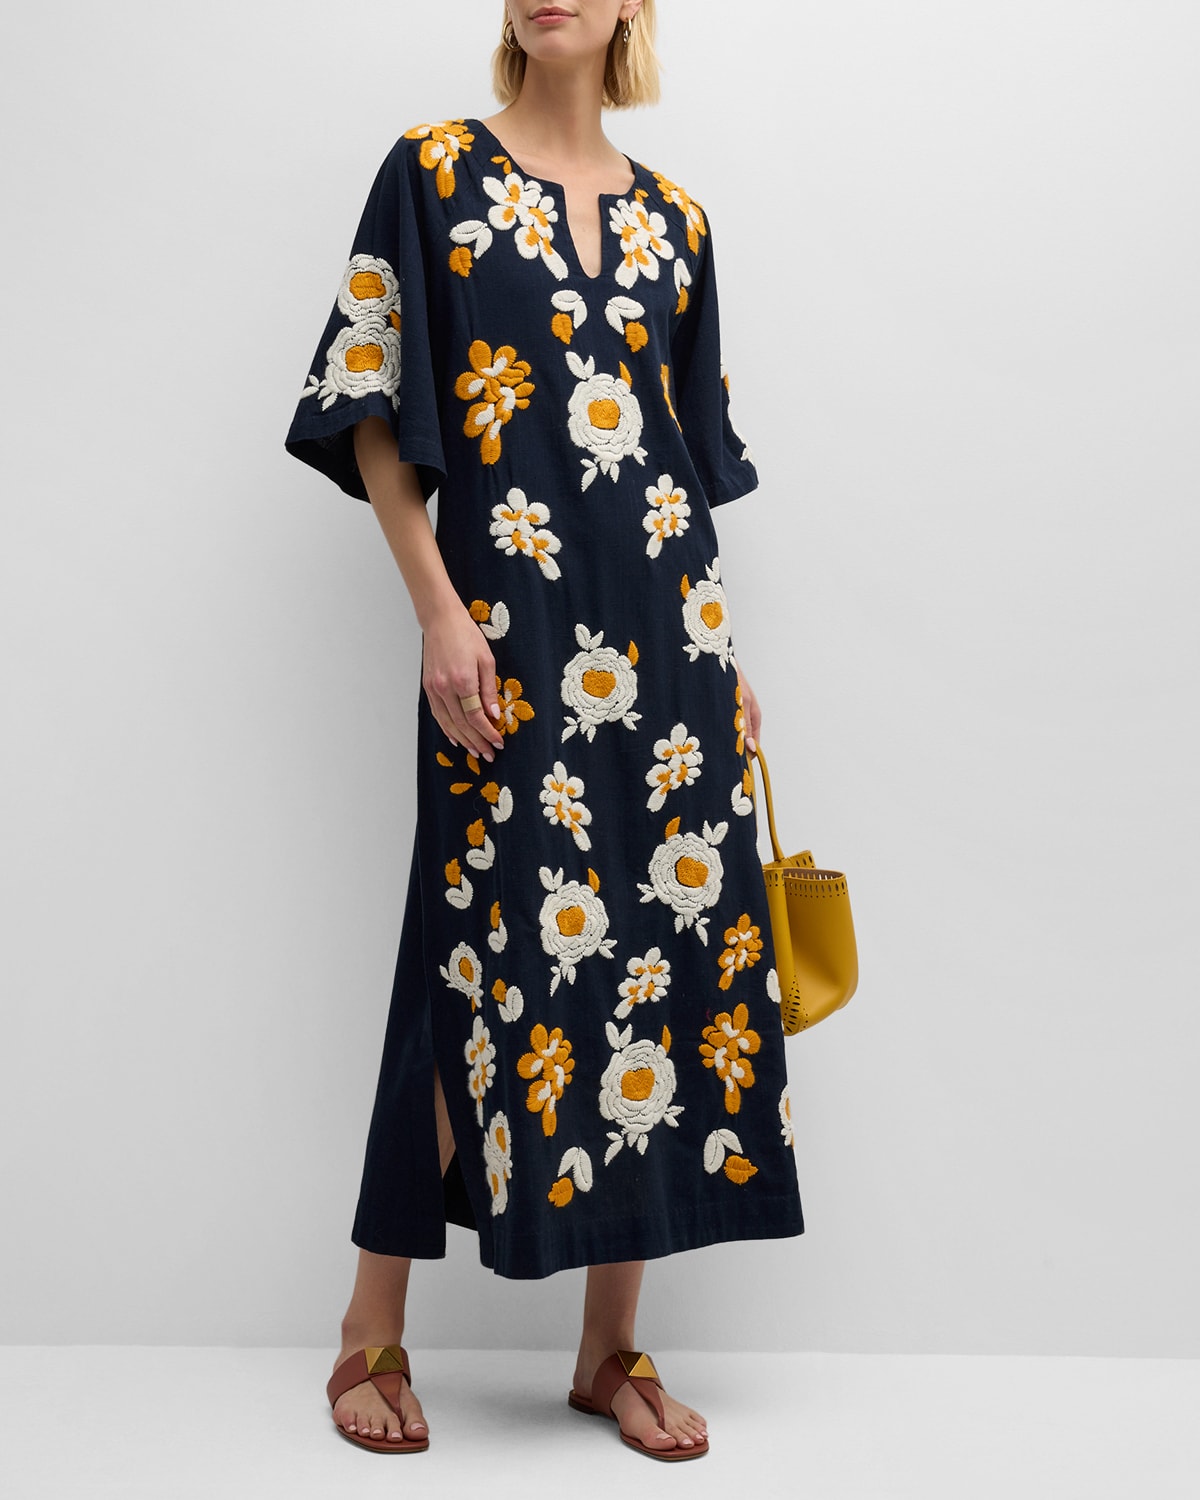 FRANCES VALENTINE DREAMY FLORAL-EMBROIDERED ELBOW-SLEEVE DRESS